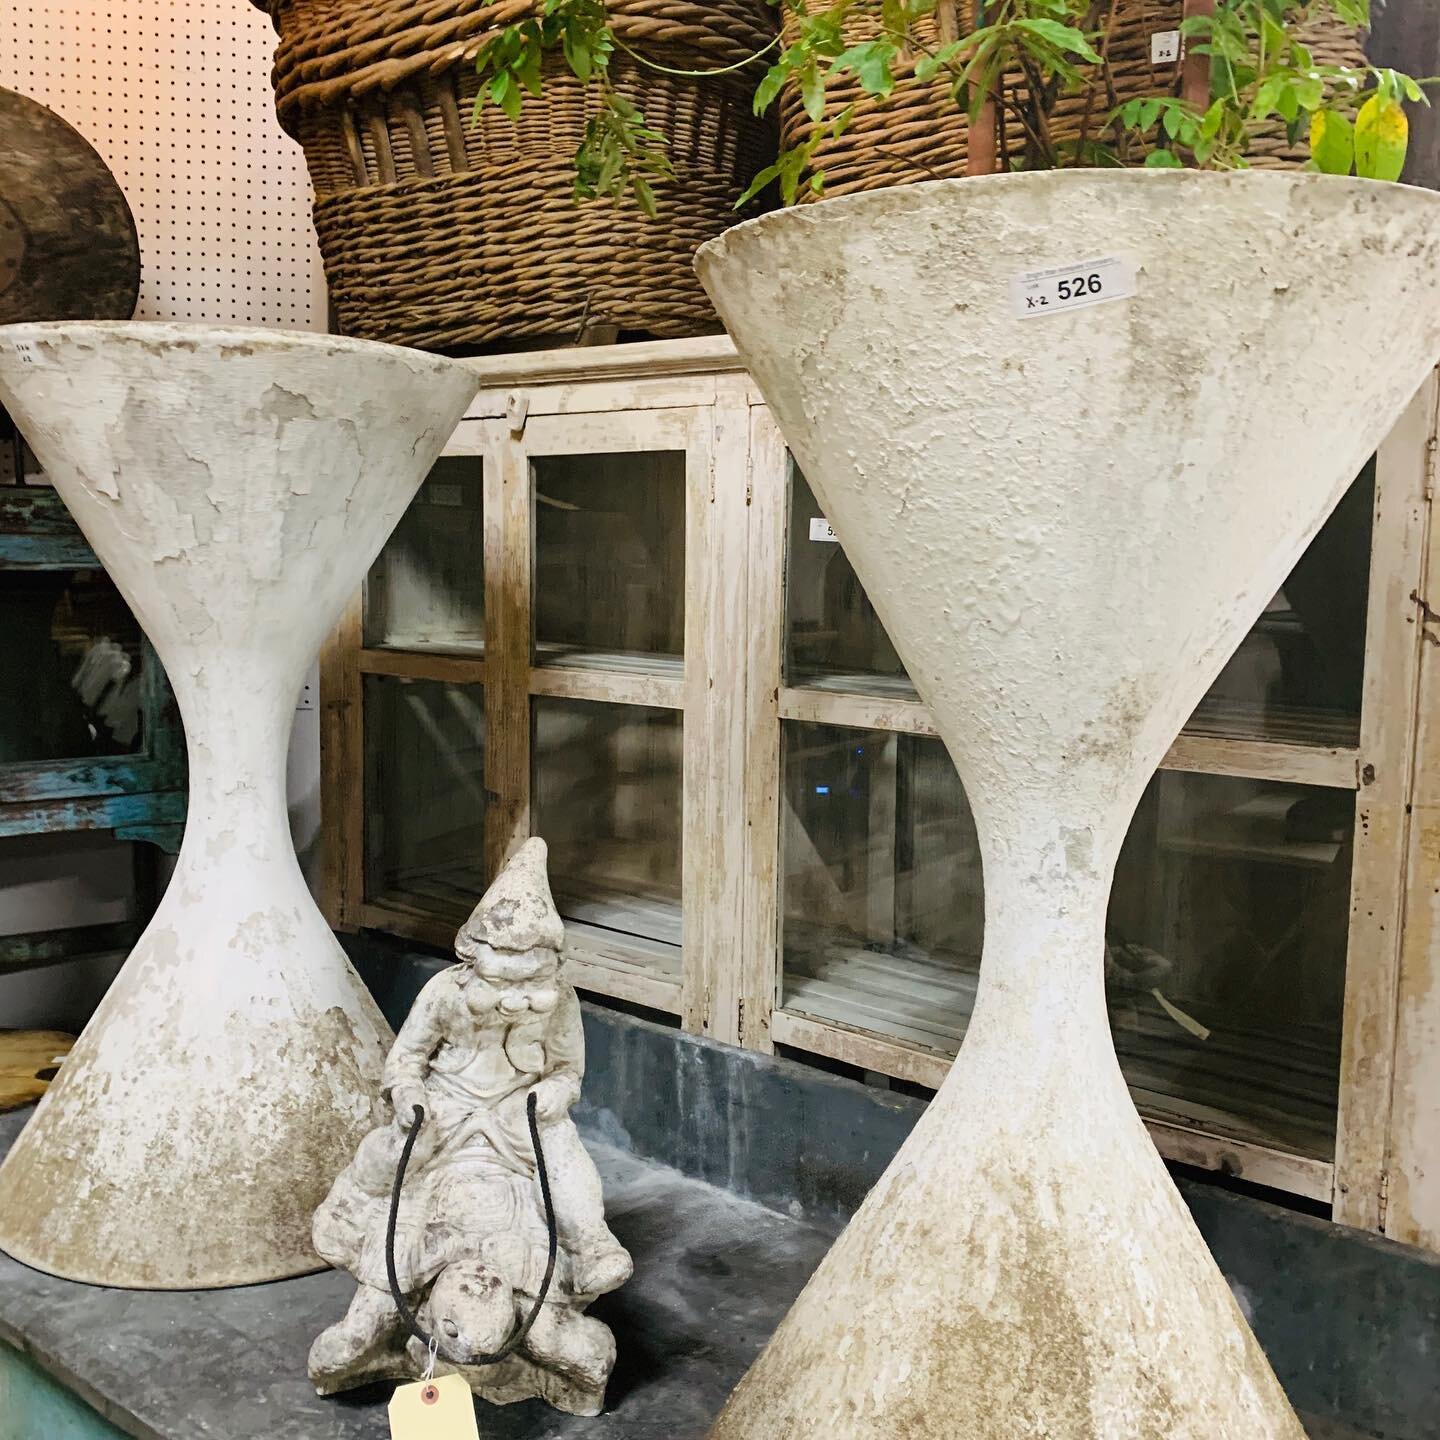 We have those garden urns and planters you&rsquo;ve been looking for 💁&zwj;♂️ 3500 lots in our upcoming auction Aug 27-29 
www.brightstarantiques.com #gardening #garden #mcm #gardens #gardenlife #european #france #patina #brightstarantiques #roundto